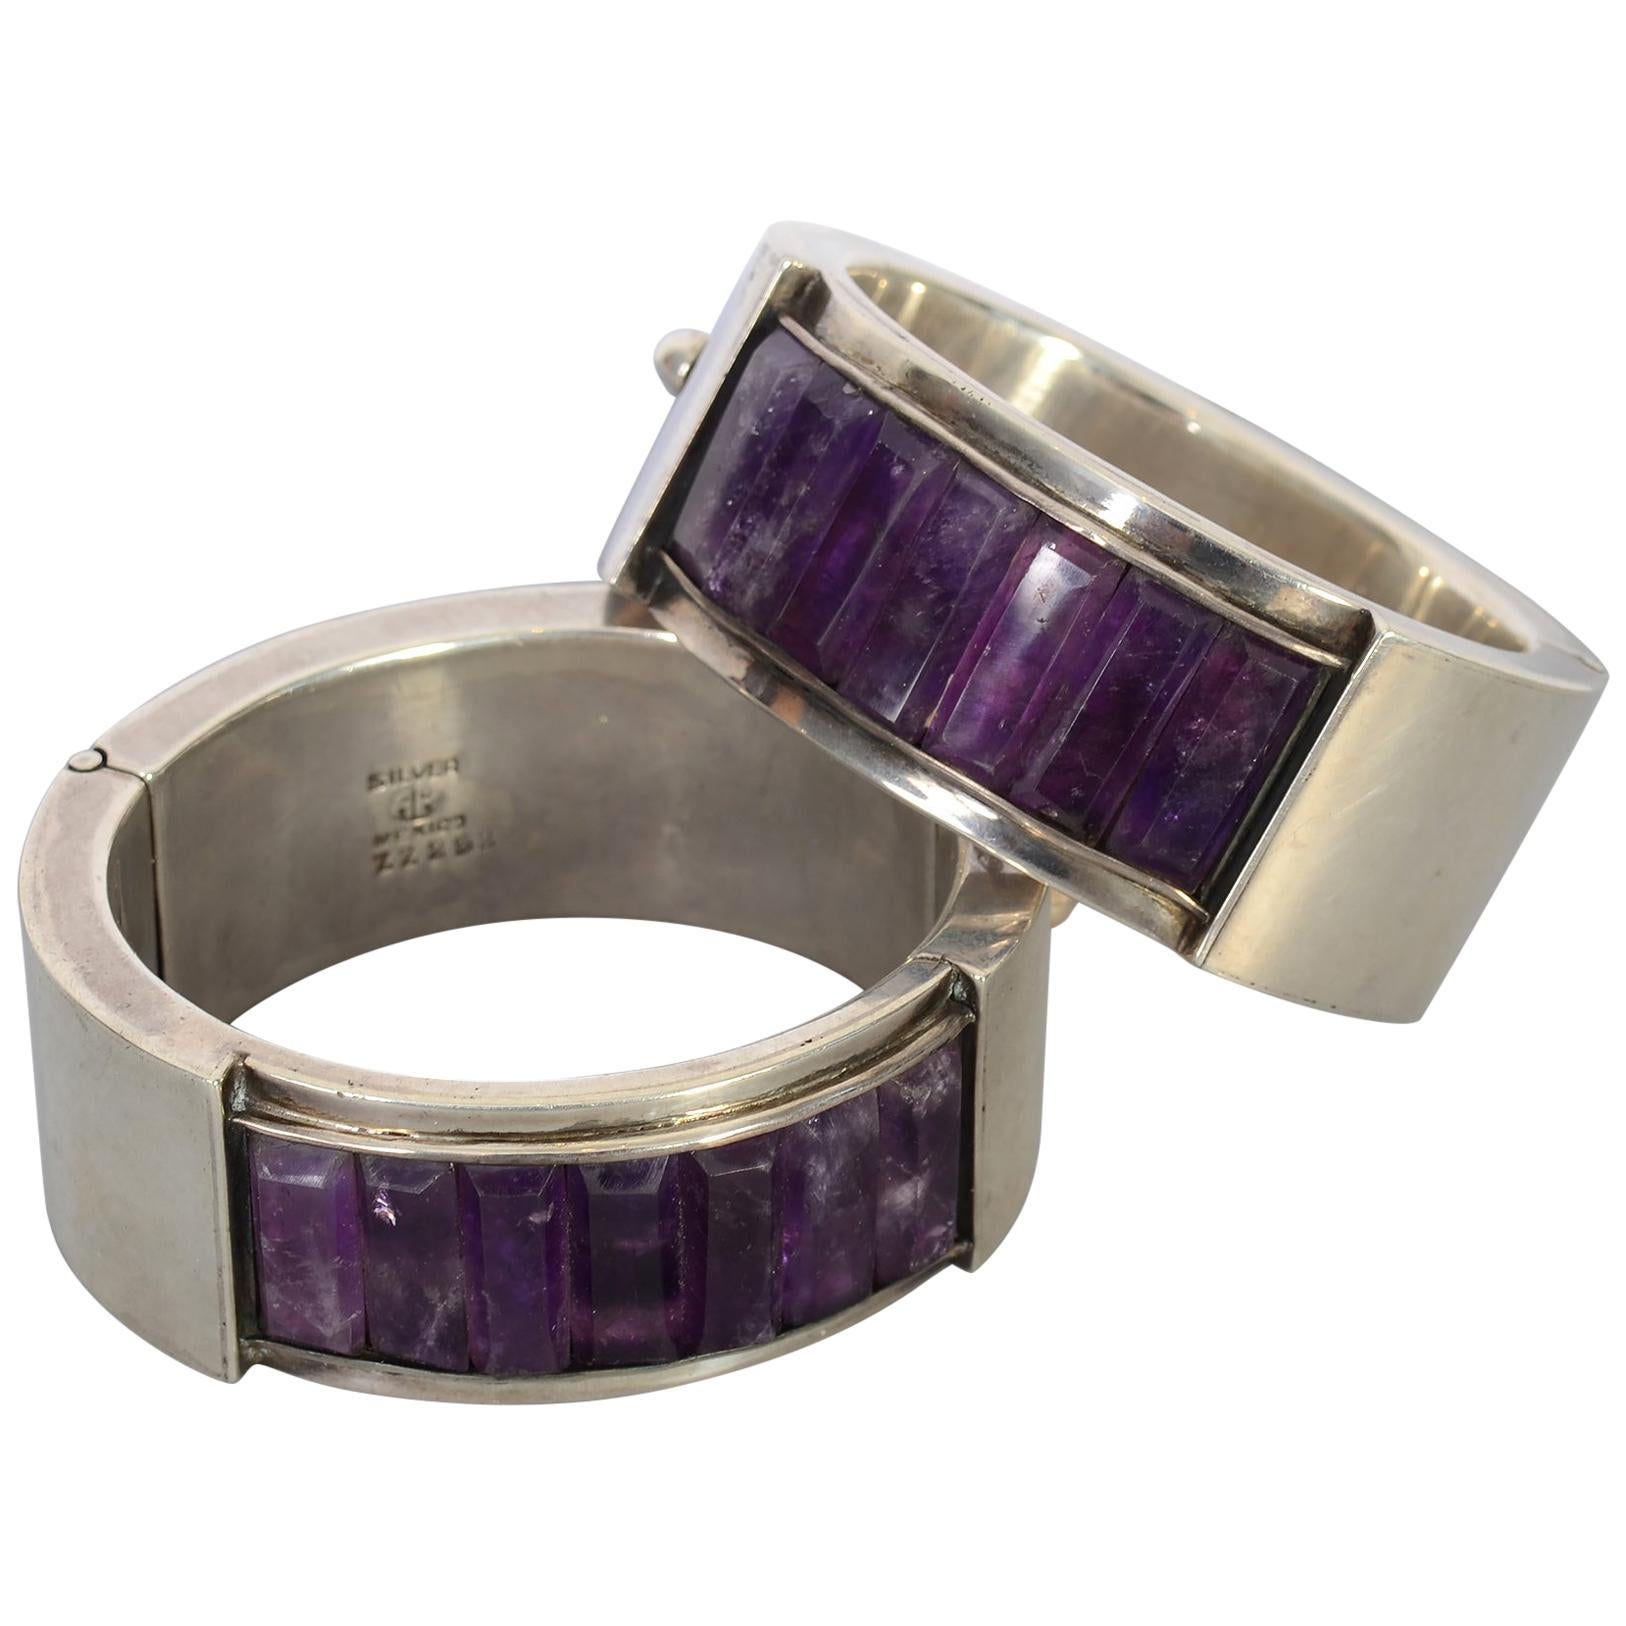 Antonio Pineda Pair of Sterling Silver and Amethyst Hinged Bangle Bracelets